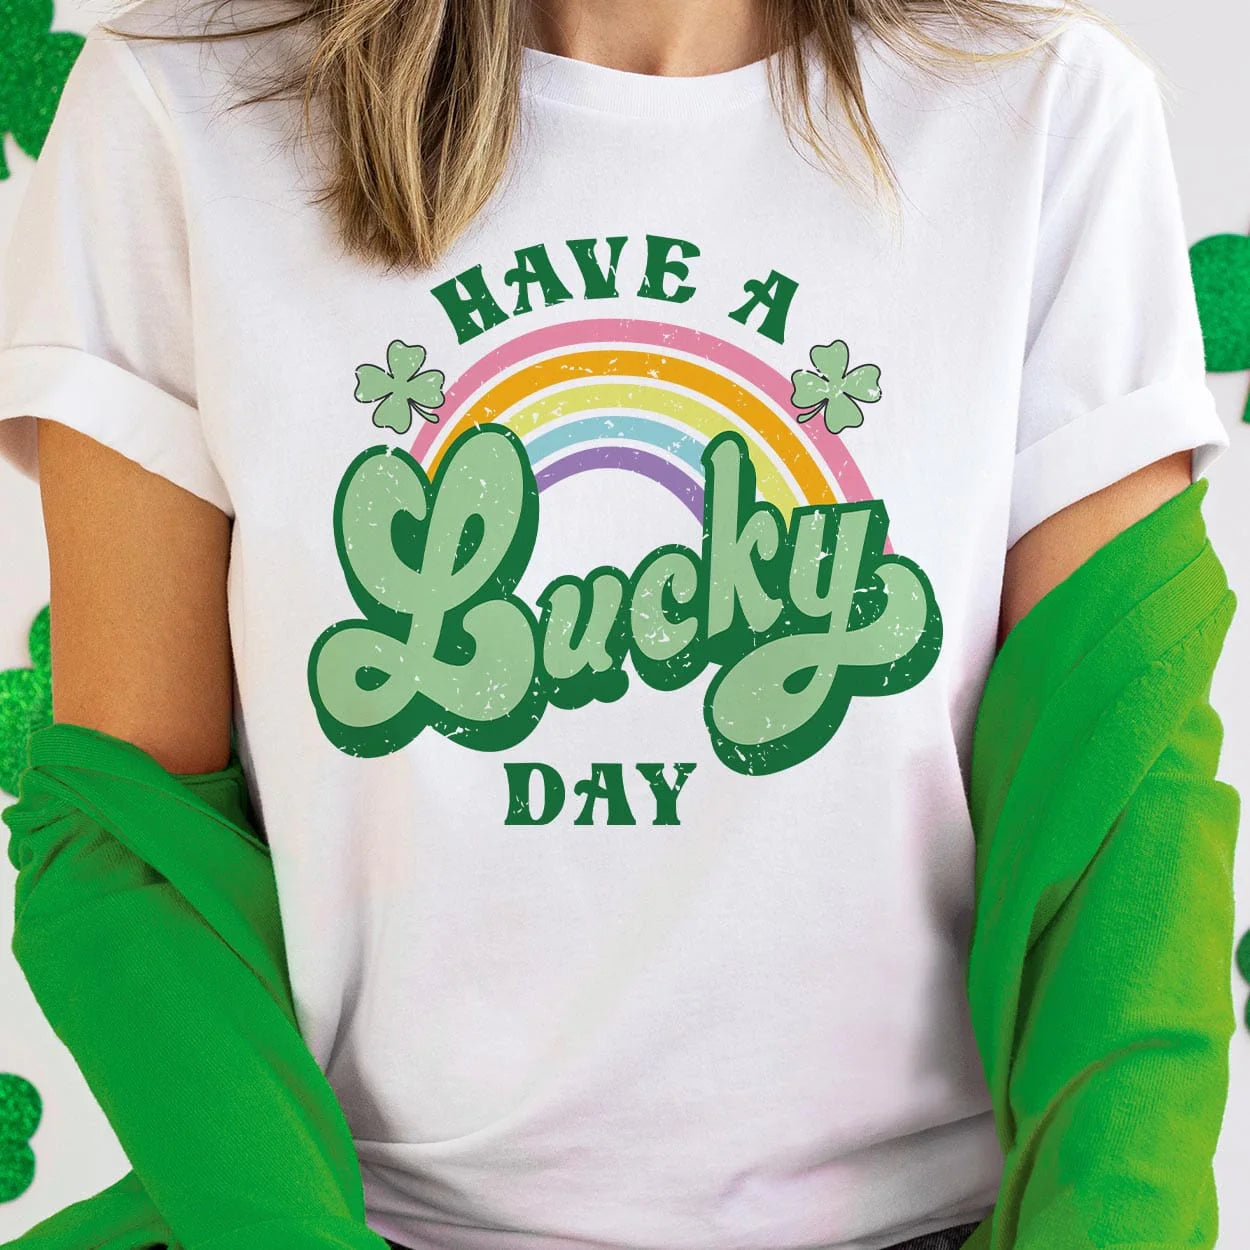 A white short sleeve shirt featuring the words "Have a lucky day" with a rainbow going through the middle with clovers. The word "lucky" is in cursive and a larger font. Item is pictured in a white and green background.